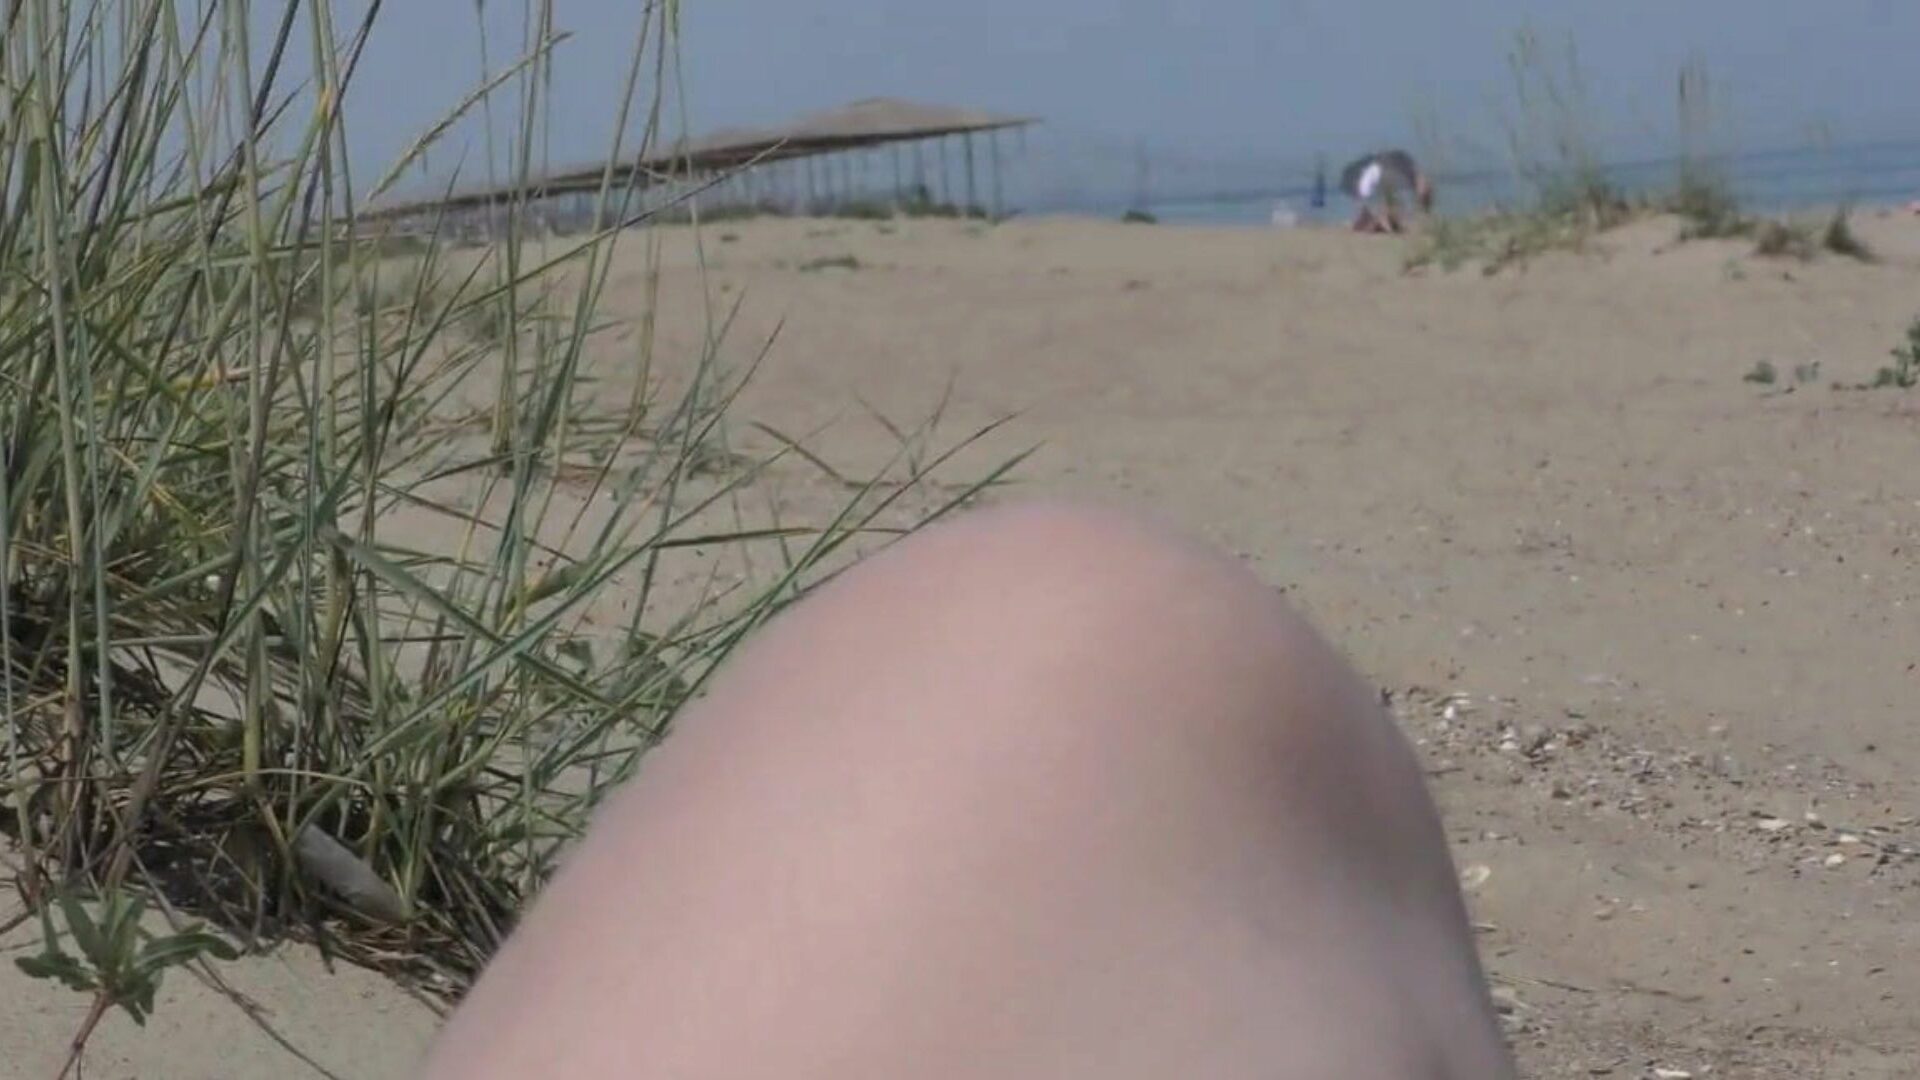 Hairy Mature on the Beach Part two Free HD Porn 60: xHamster Watch Hairy Mature on the Beach Part 2 video on xHamster, the giant HD fuck-a-thon tube web page with tons of free-for-all mother I'd like to fuck Mom & Public Nudity porno videos